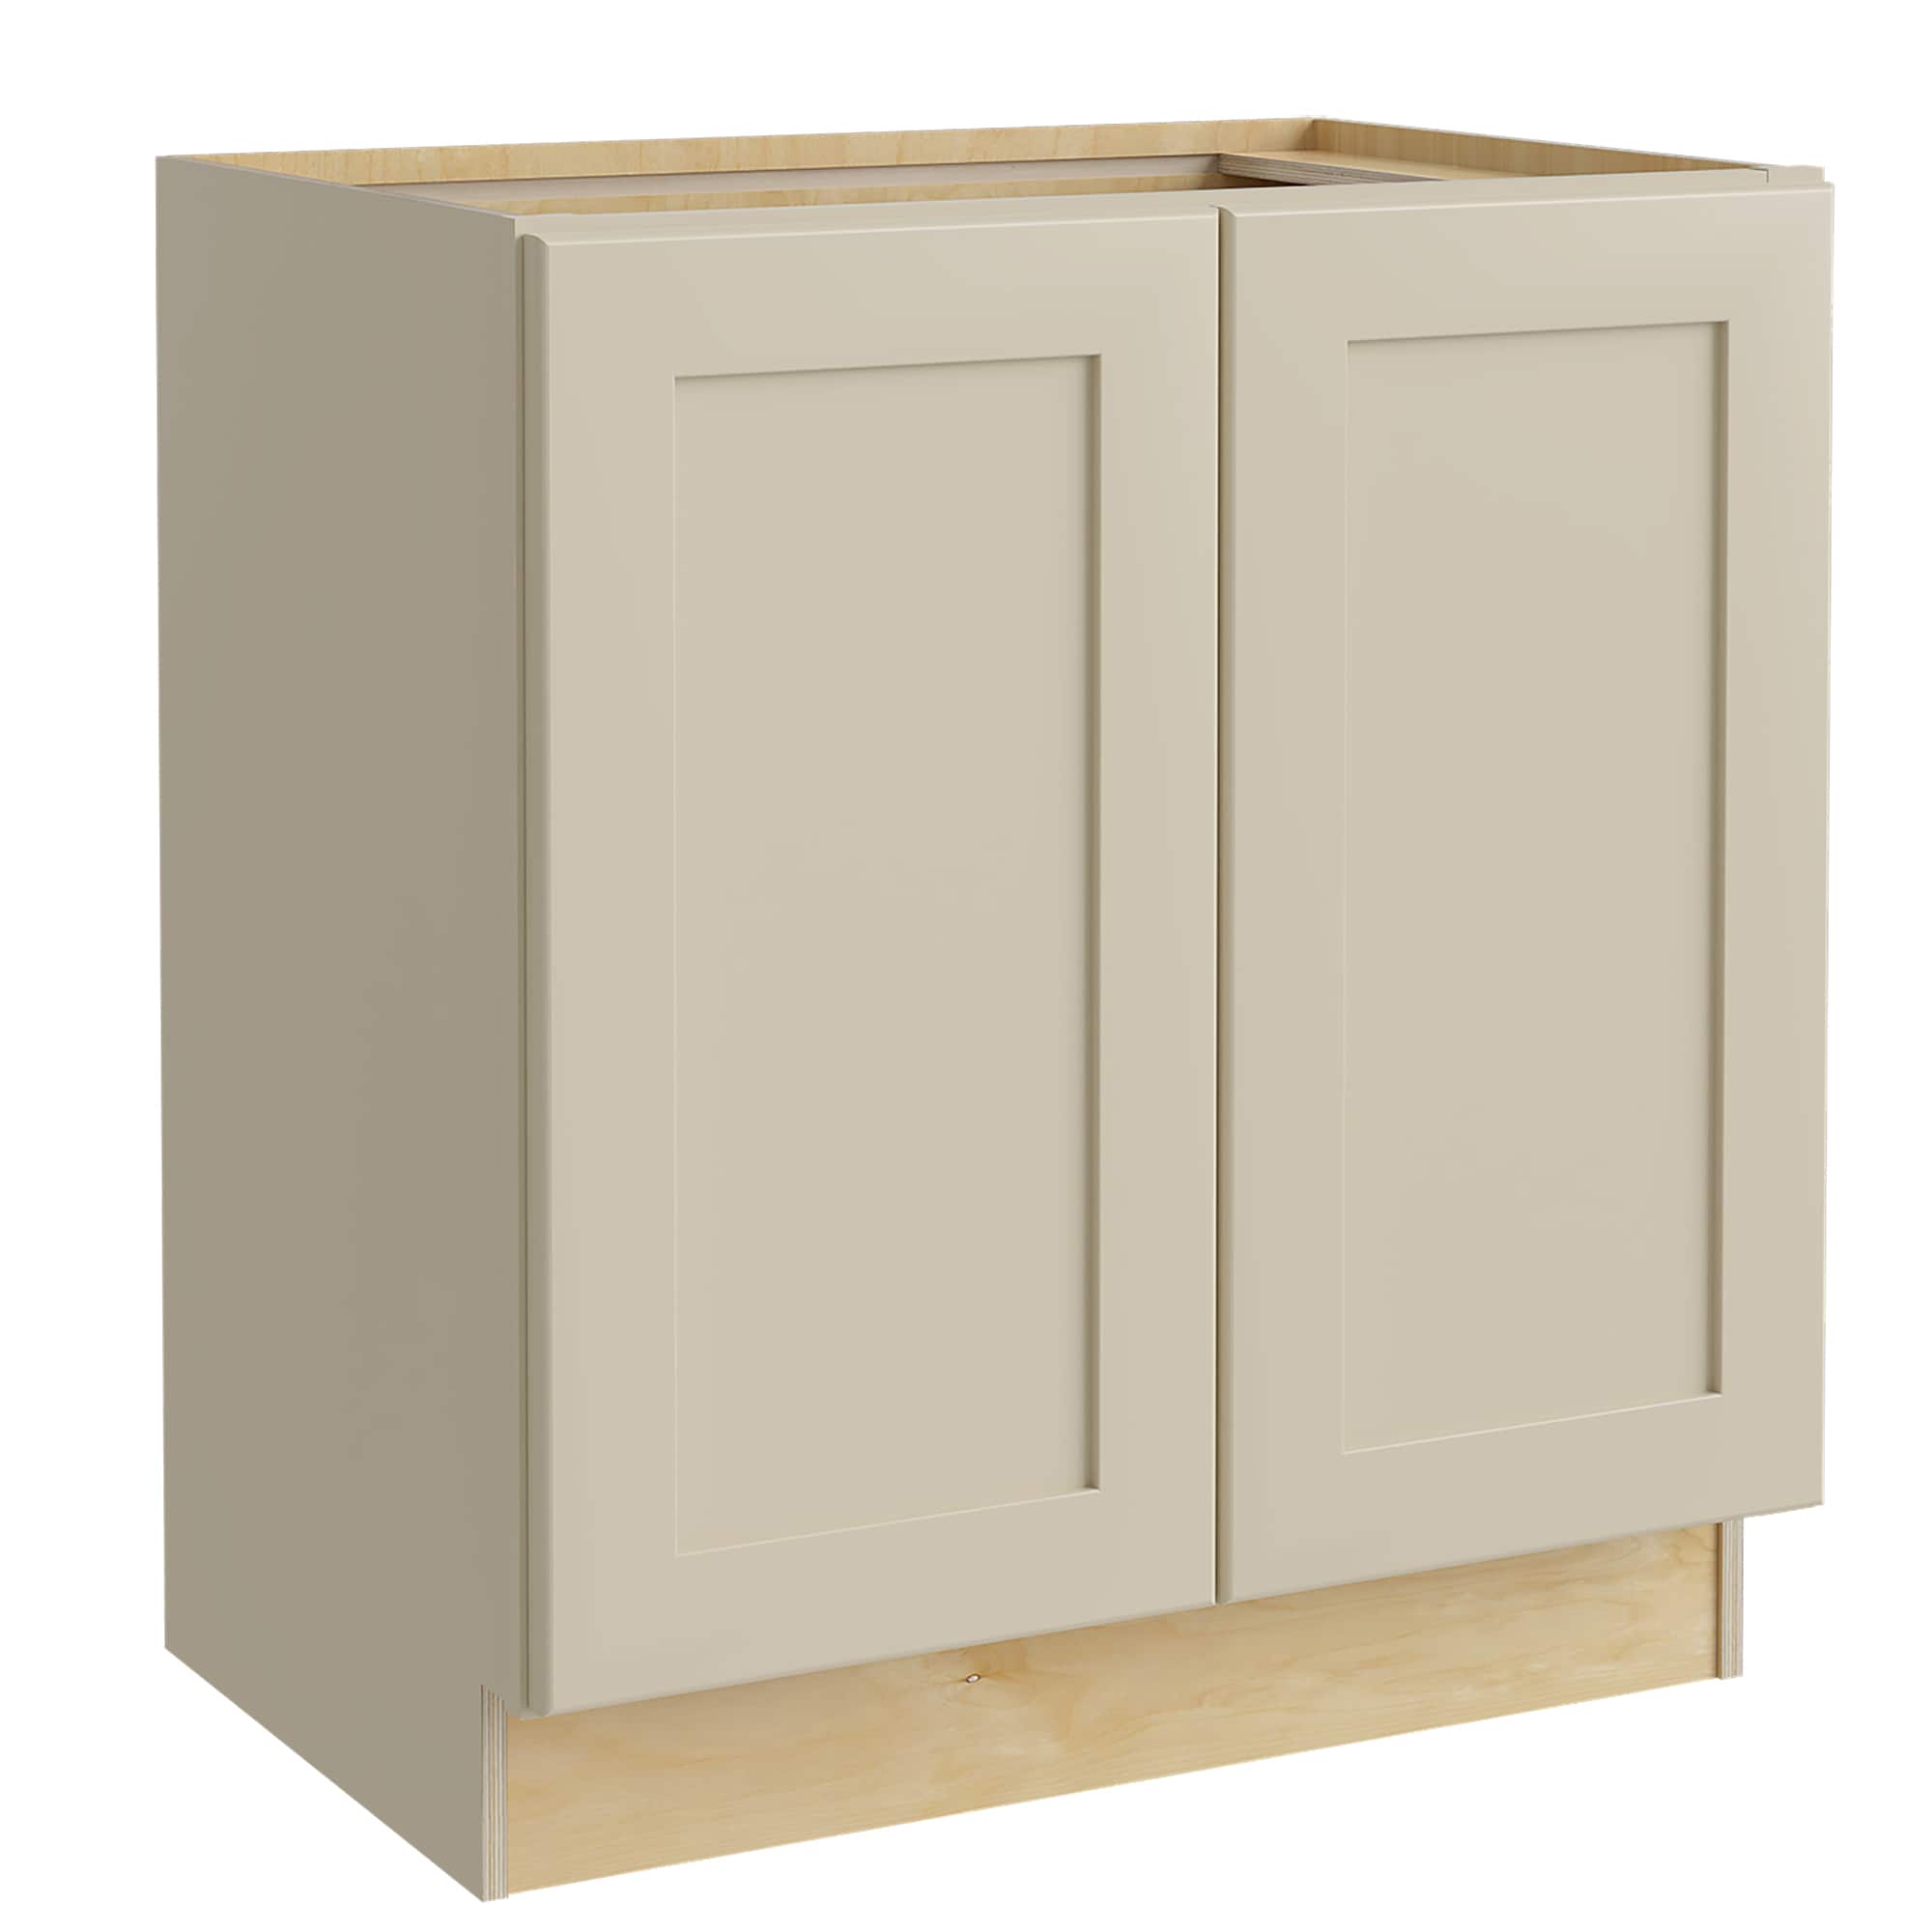 Luxxe Cabinetry 33-in W x 34.5-in H x 24-in D Norfolk Blended Cream Painted Door Base Fully Assembled Semi-custom Cabinet in Off-White | B33FH-NBC